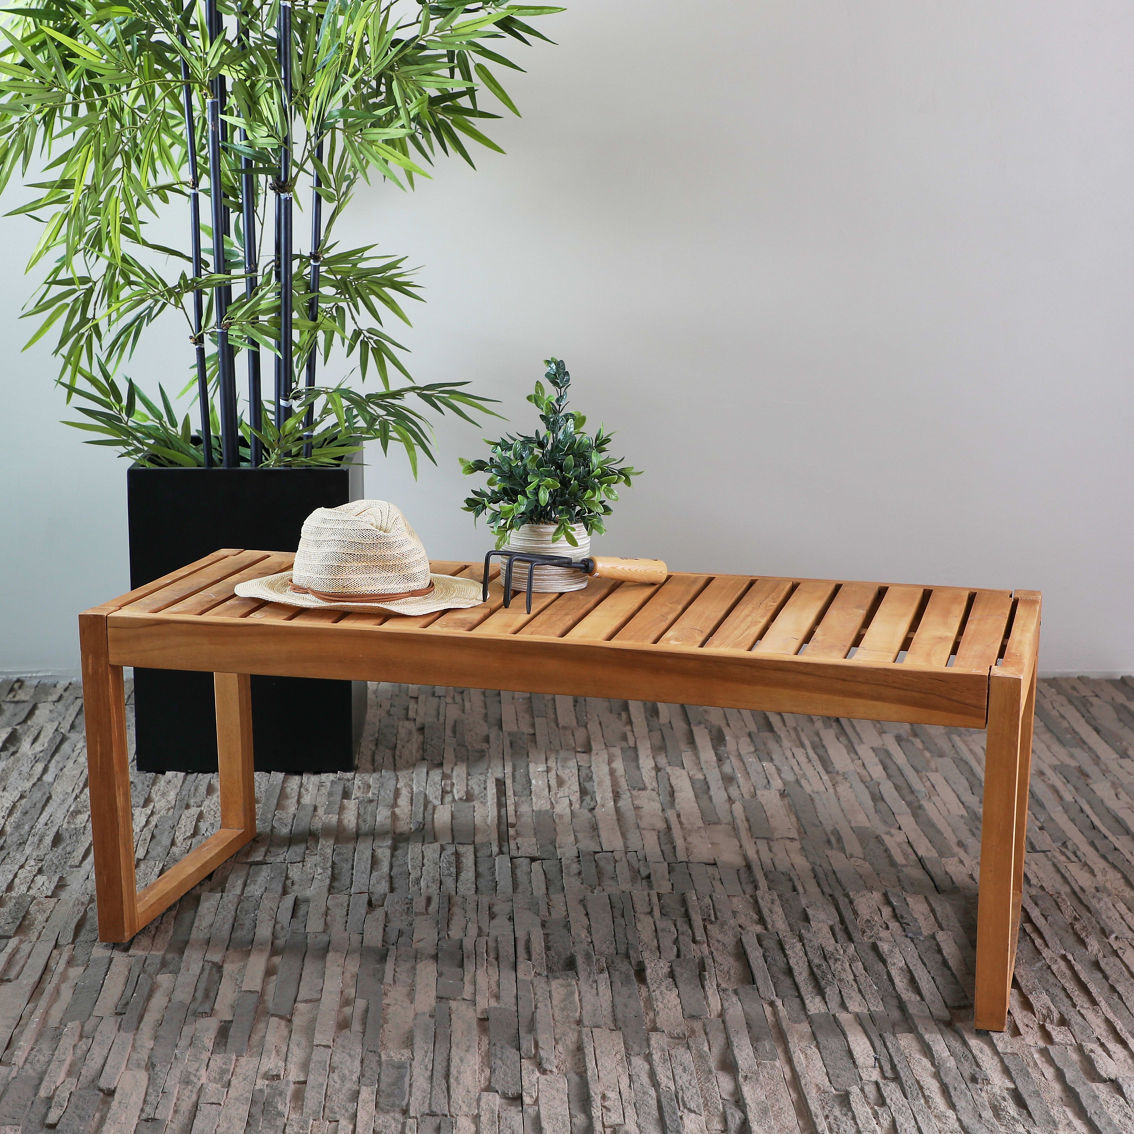 Morgan Hill Home Contemporary Brown Teak Wood Outdoor Coffee Table - Image 2 of 5